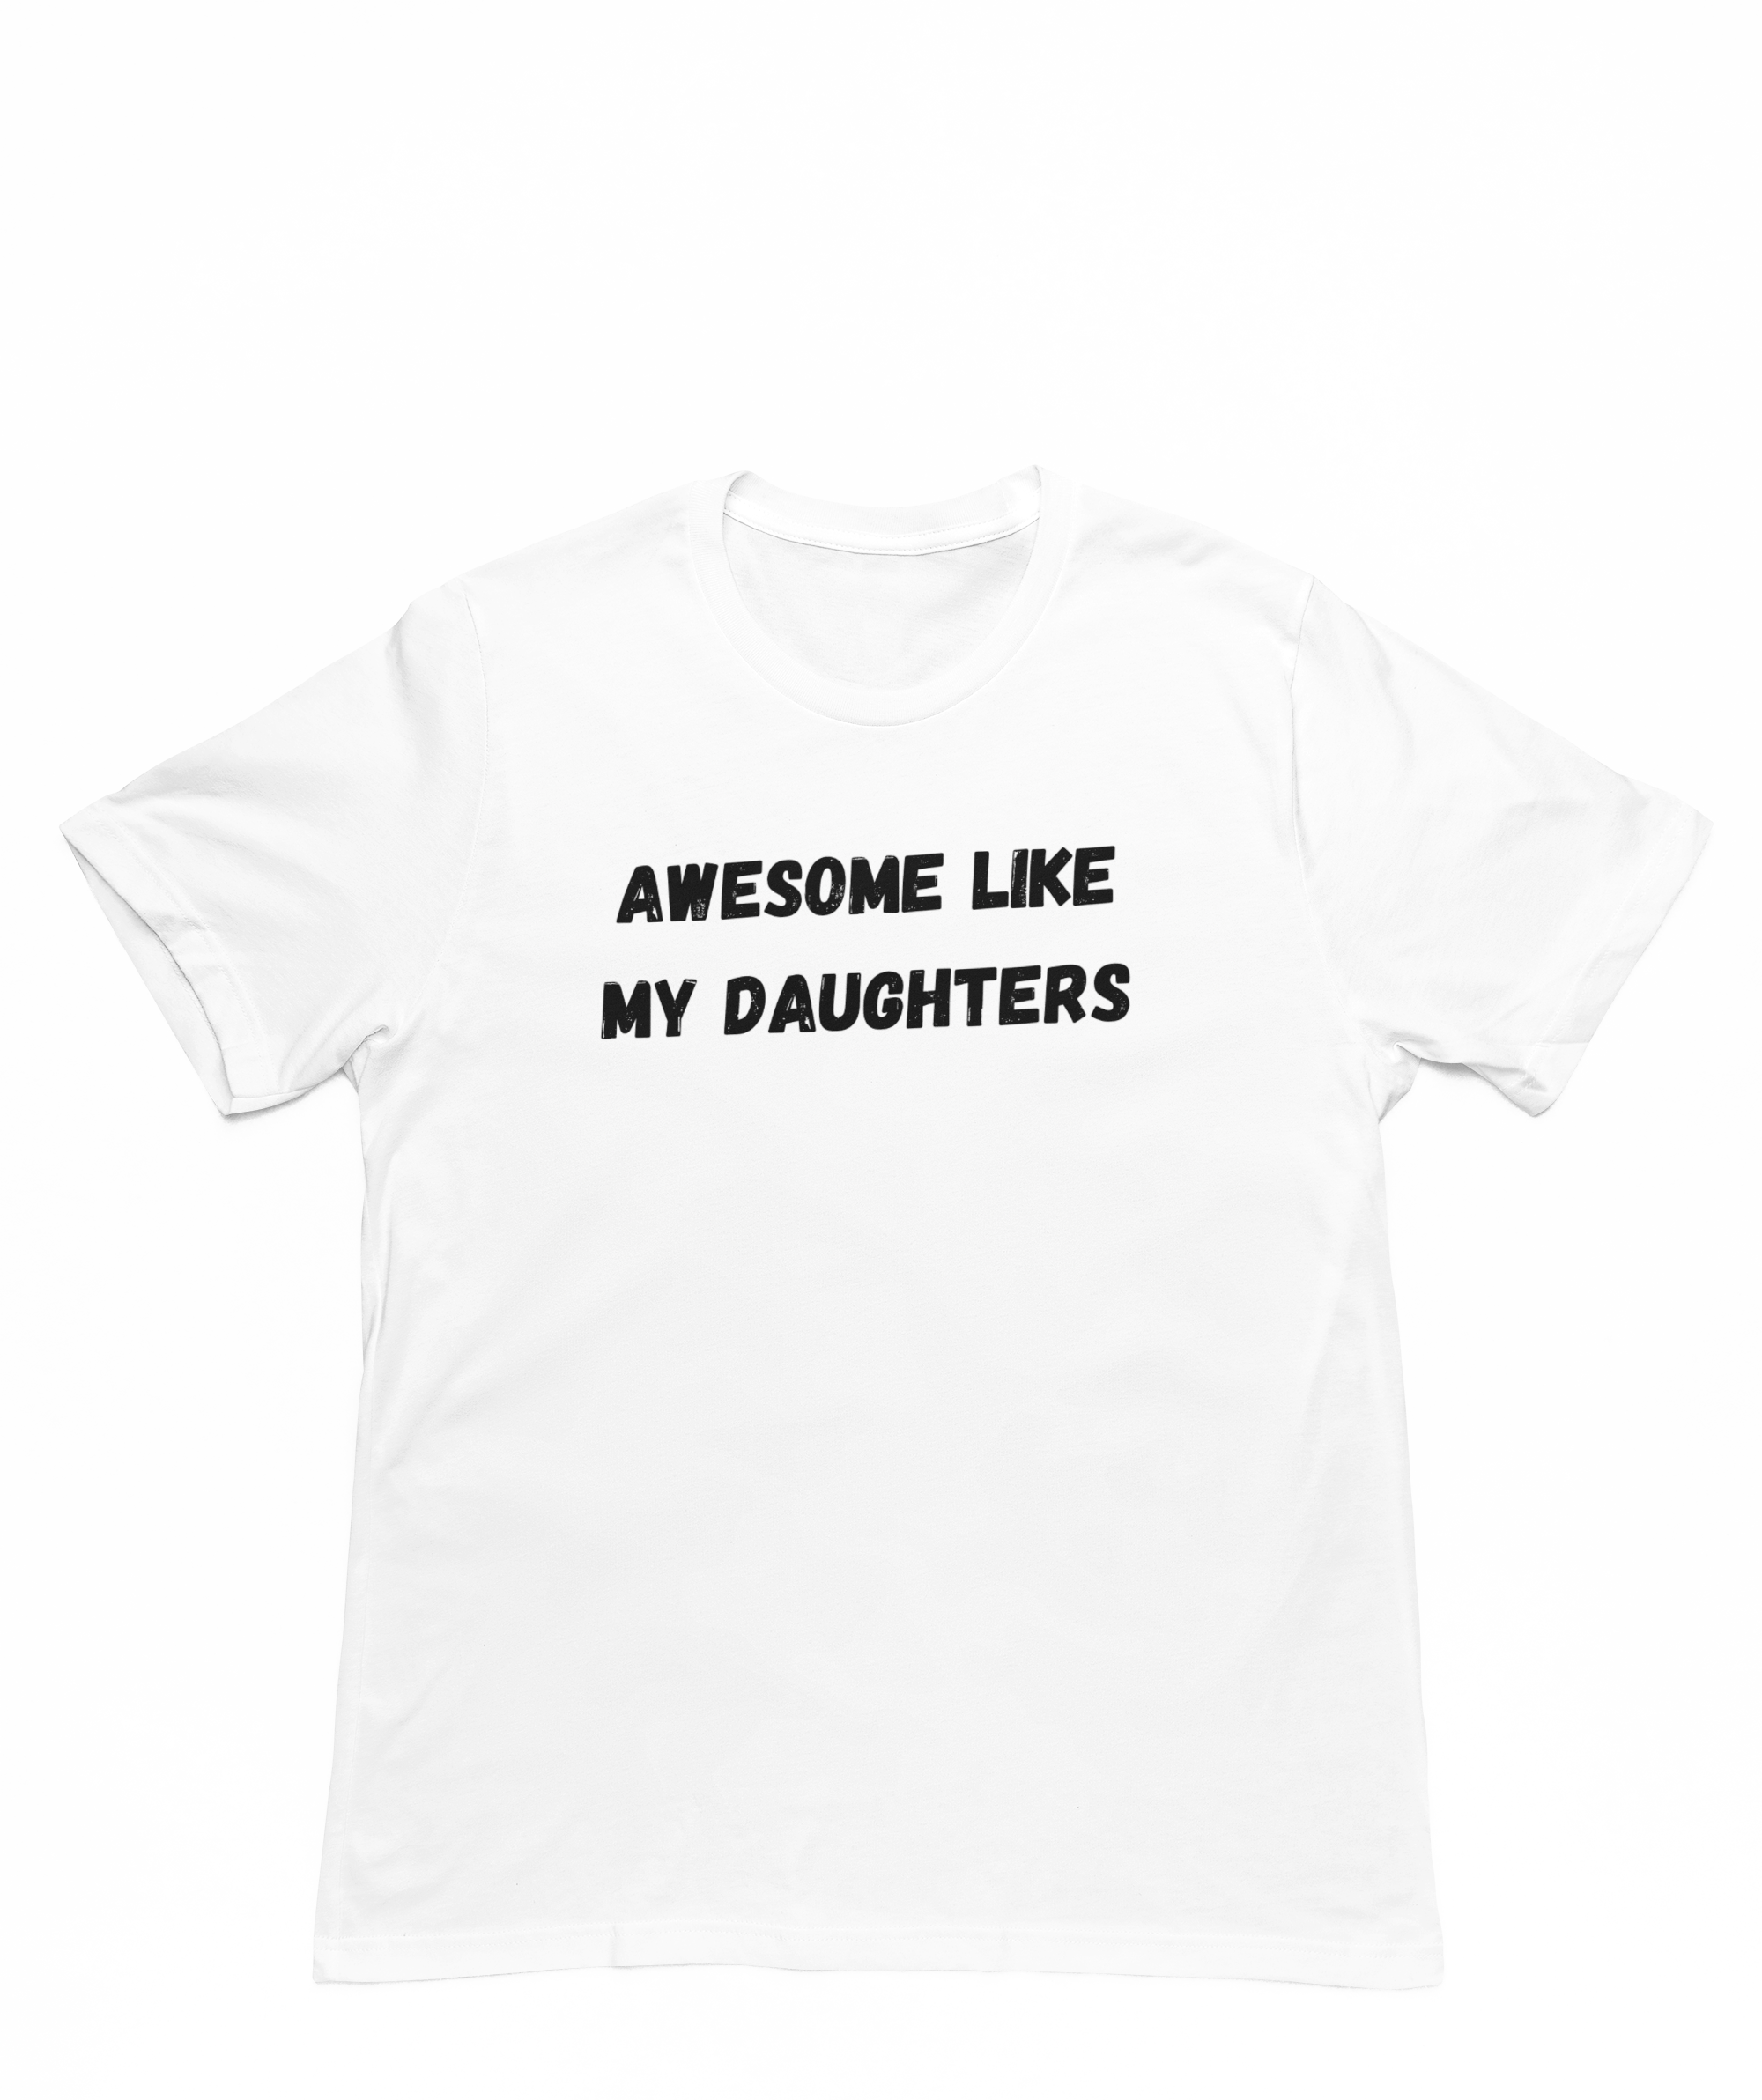 Awesome like my Daughters t-shirt - Father's Day gift